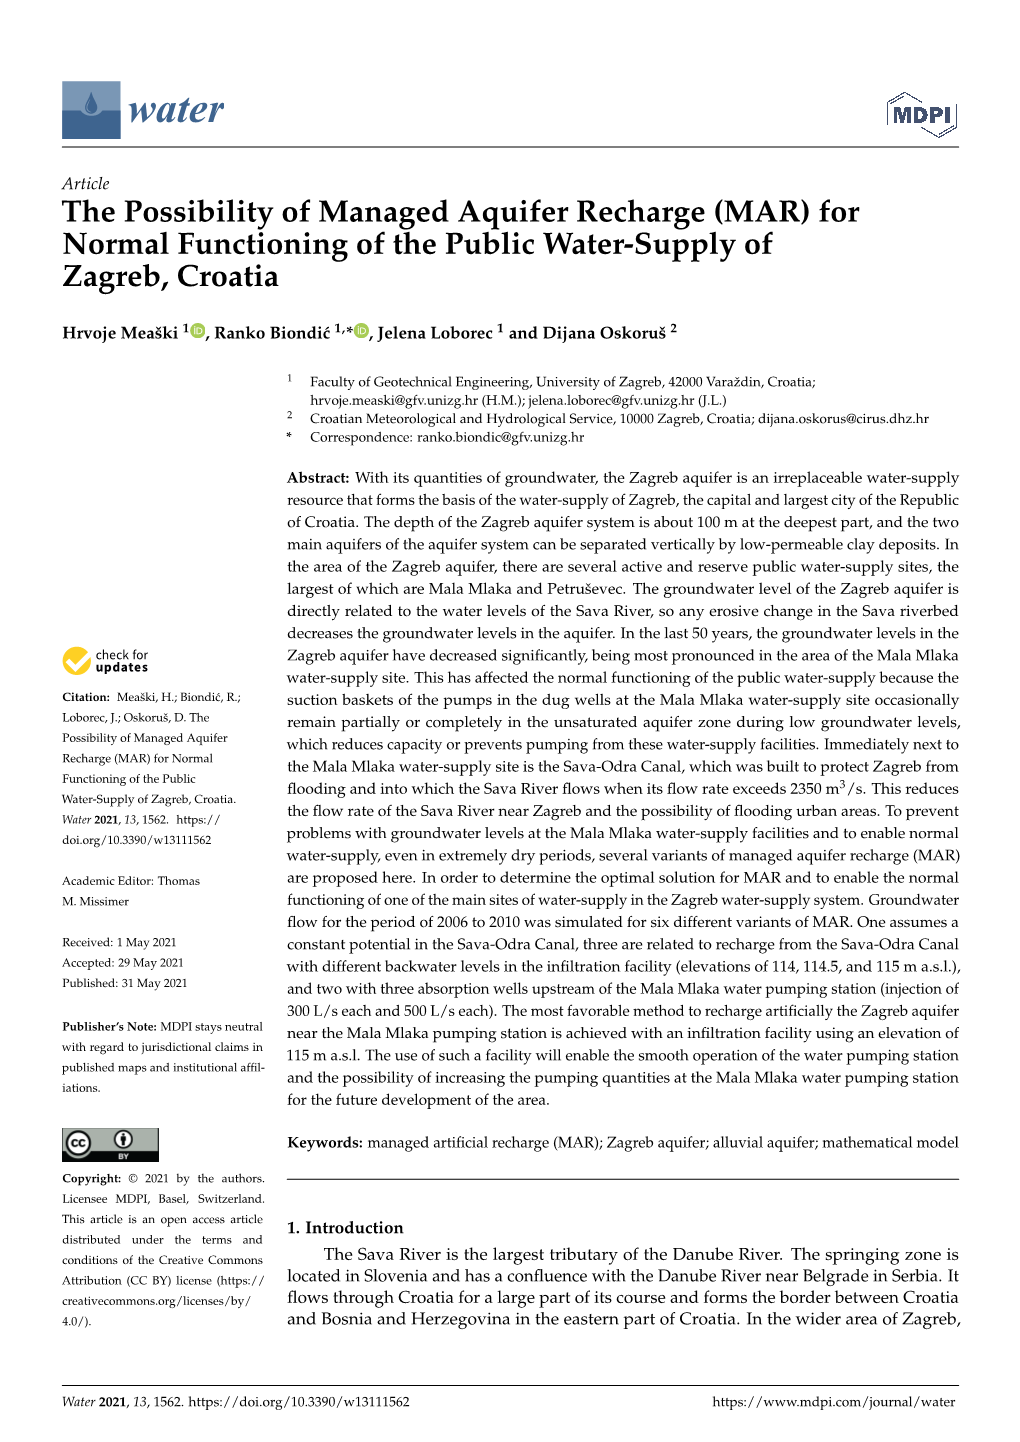 The Possibility of Managed Aquifer Recharge (MAR) for Normal Functioning of the Public Water-Supply of Zagreb, Croatia